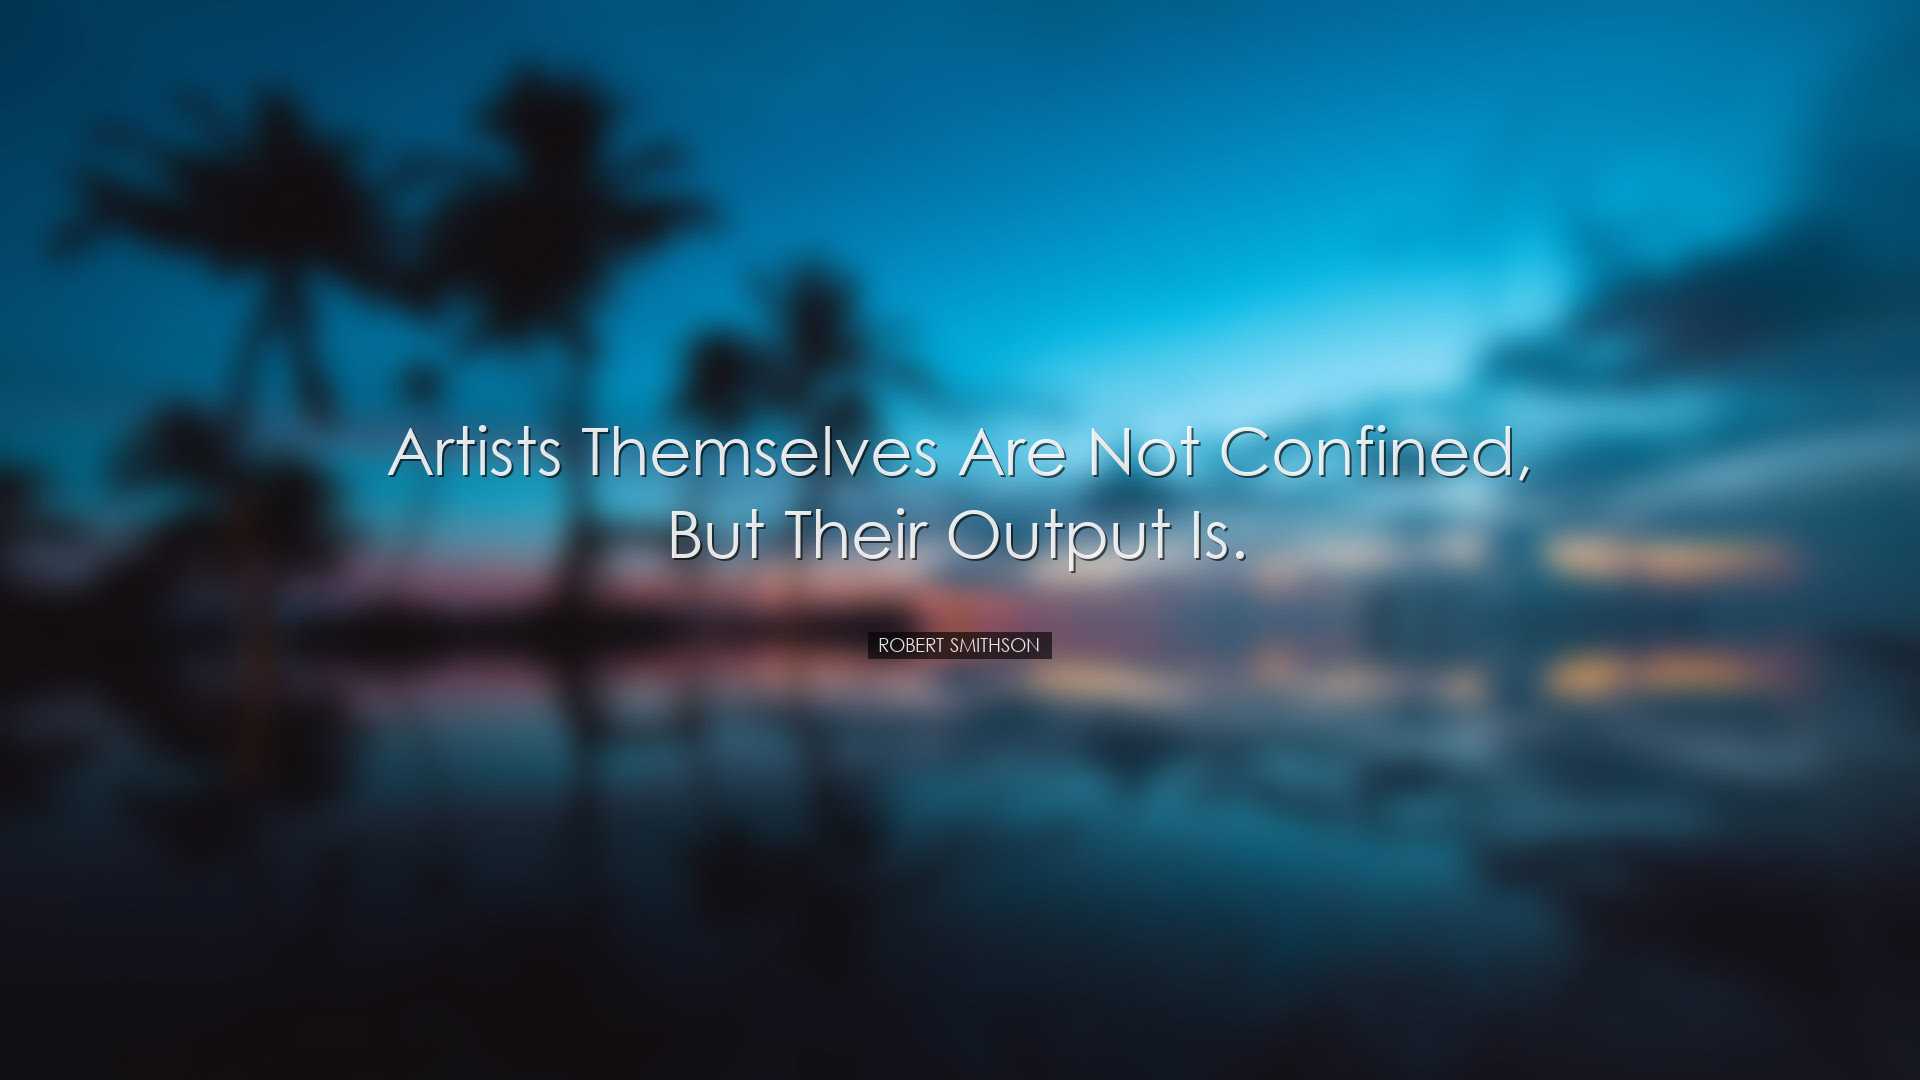 Artists themselves are not confined, but their output is. - Robert